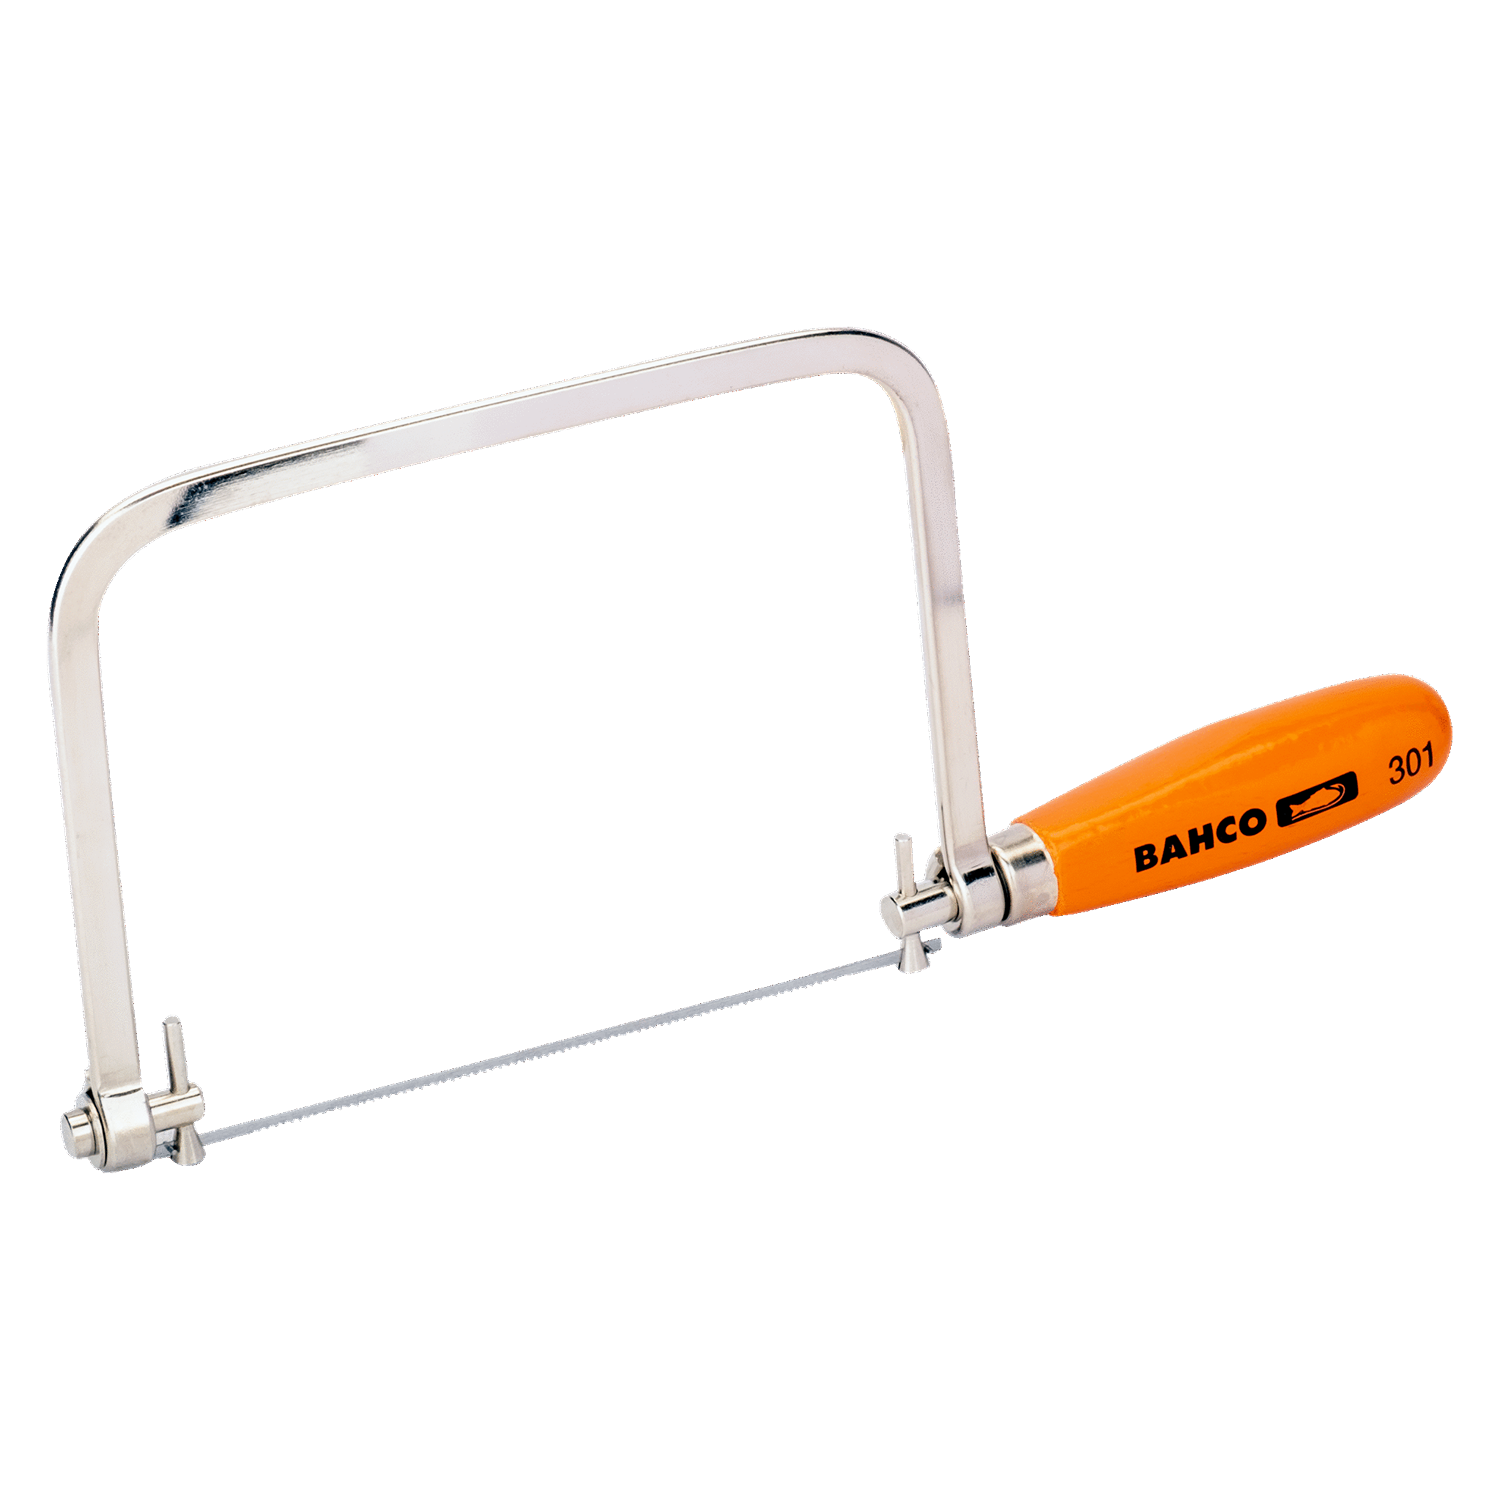 BAHCO 301 Coping Saw with Wooden Handle (BAHCO Tools) - Premium Coping Saw from BAHCO - Shop now at Yew Aik.